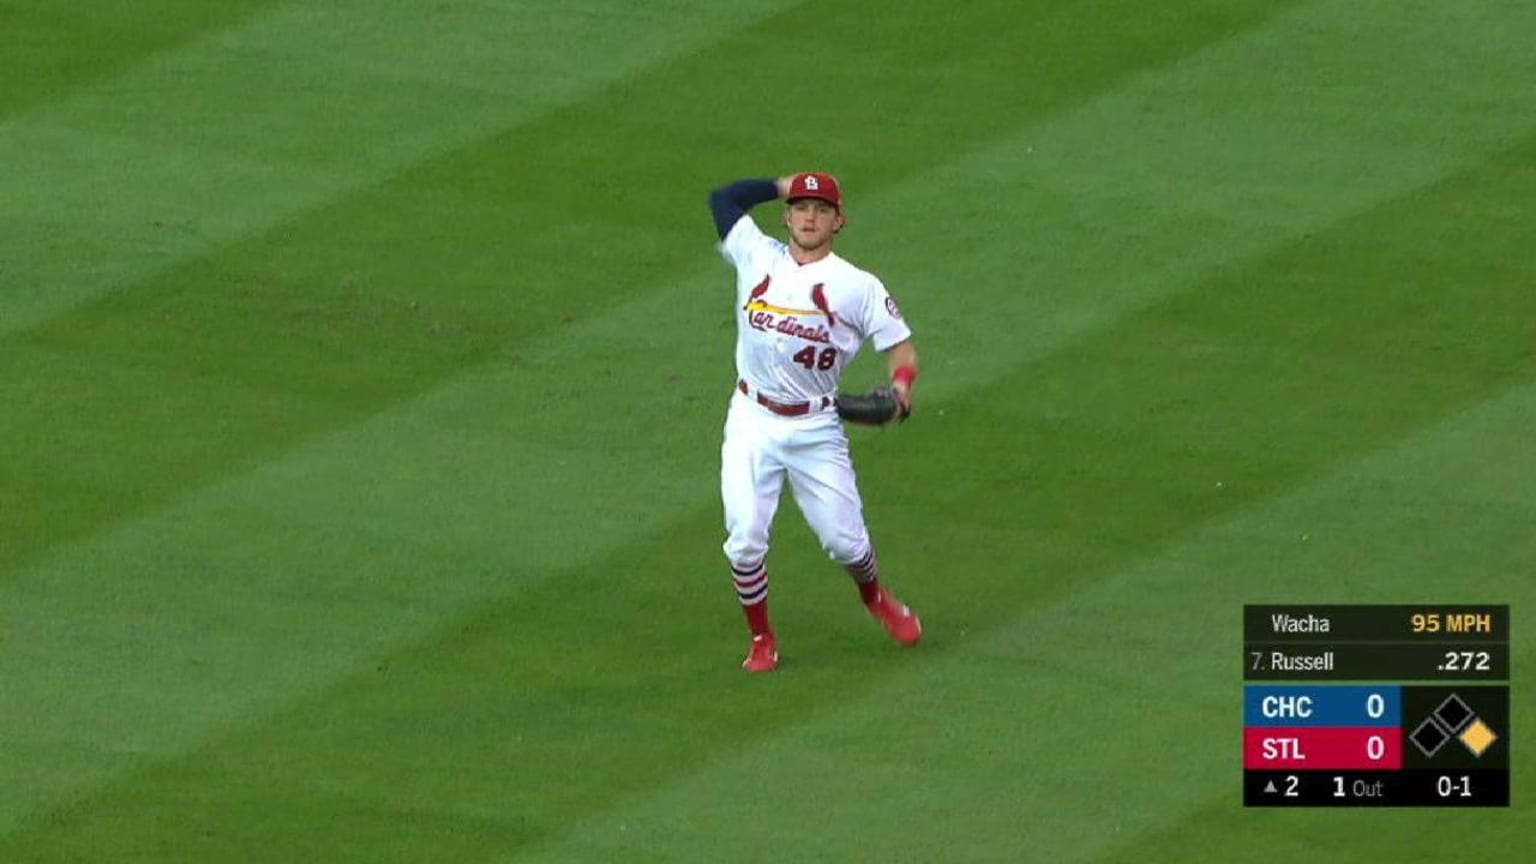 Harrison Bader Class of 2012 - Player Profile